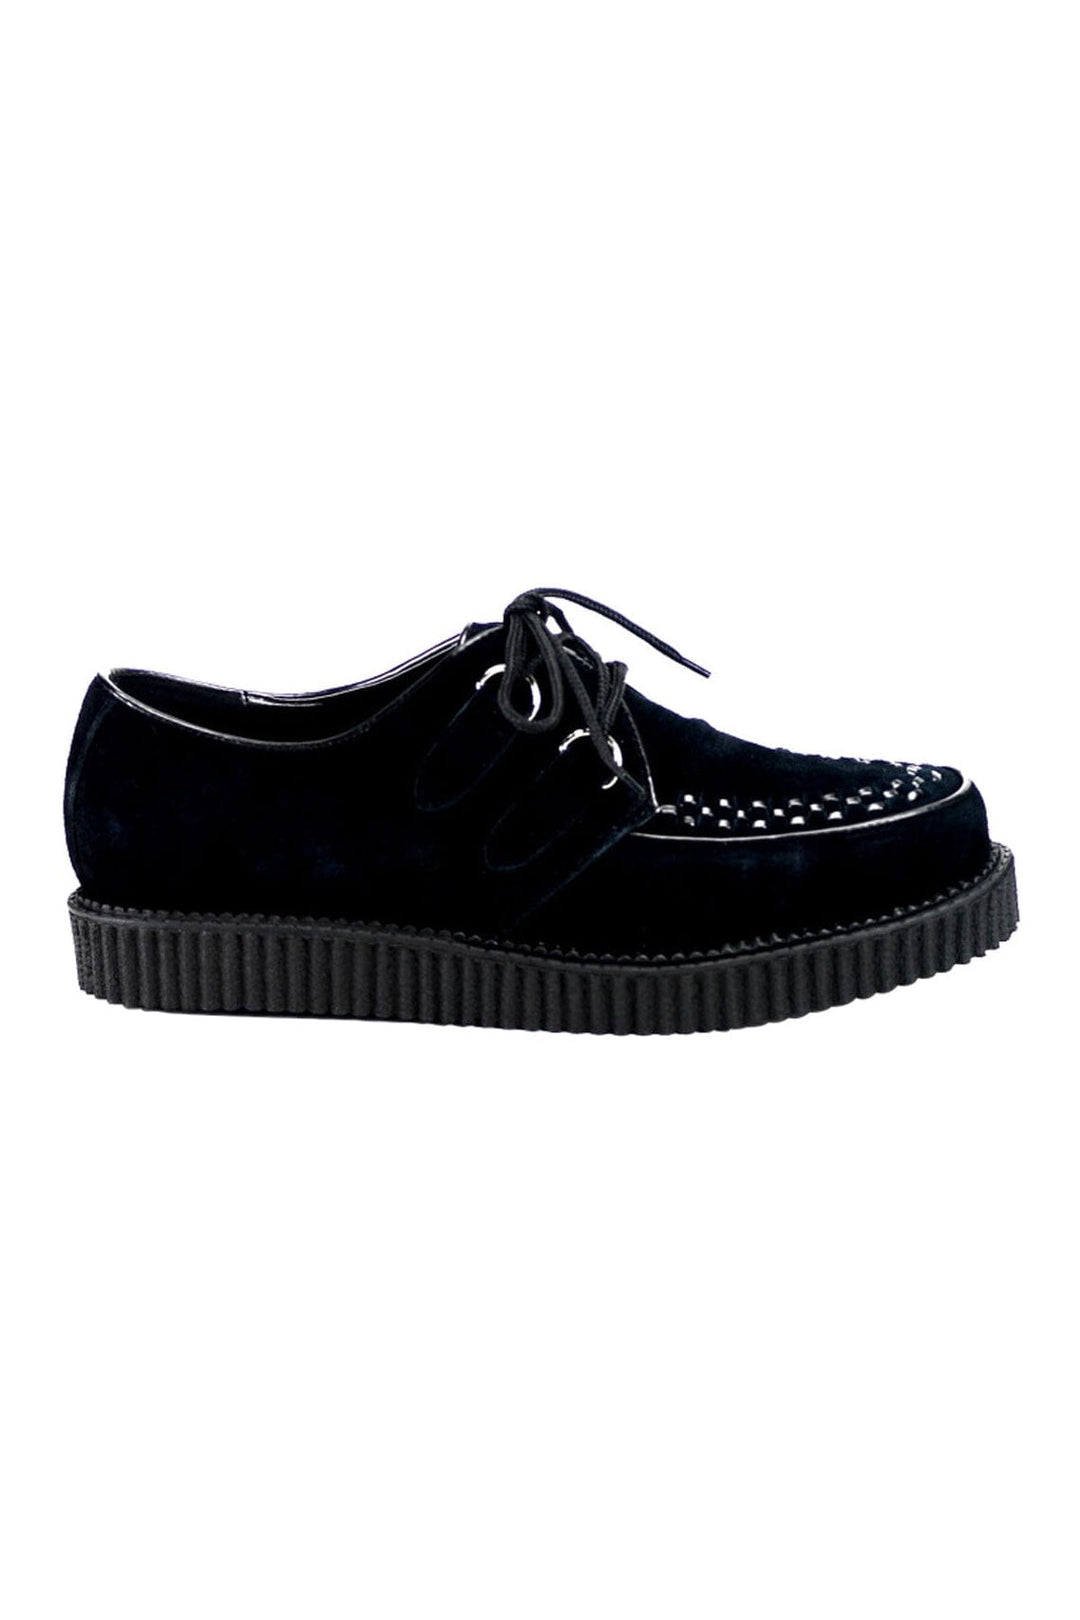 CREEPER-602S Black Suede Leather Creeper-Creepers-Demonia-Black-10-Suede Leather-SEXYSHOES.COM